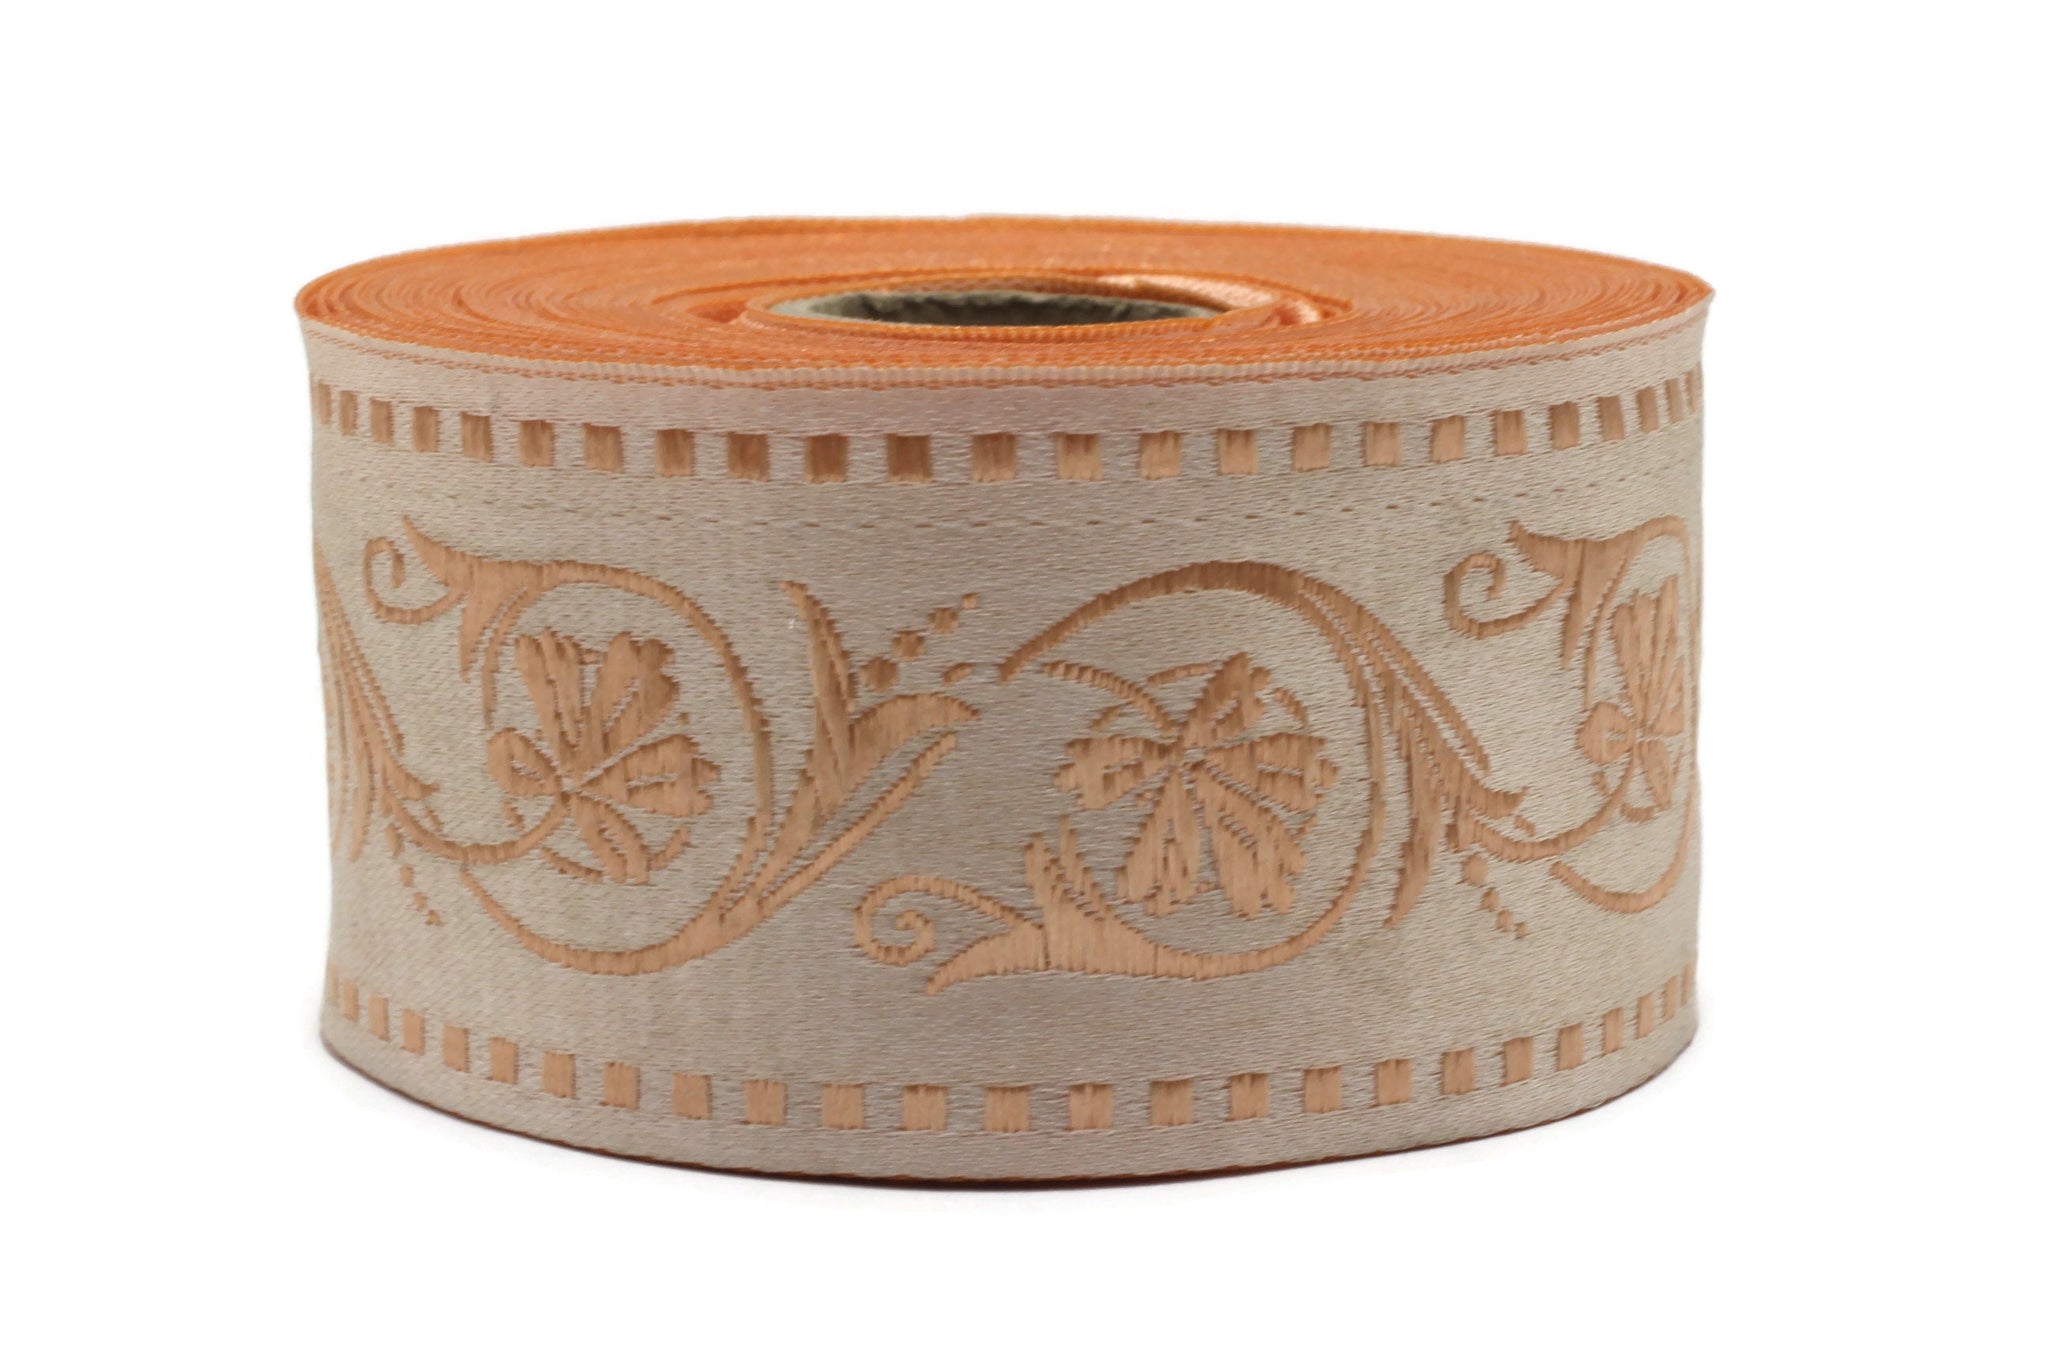 50 mm Pale Orange Wildflower ribbon, Jacquard Trims (1.96 inches), Vintage Ribbons, Decorative Ribbons, Sewing Trim, Trimming, CNK08